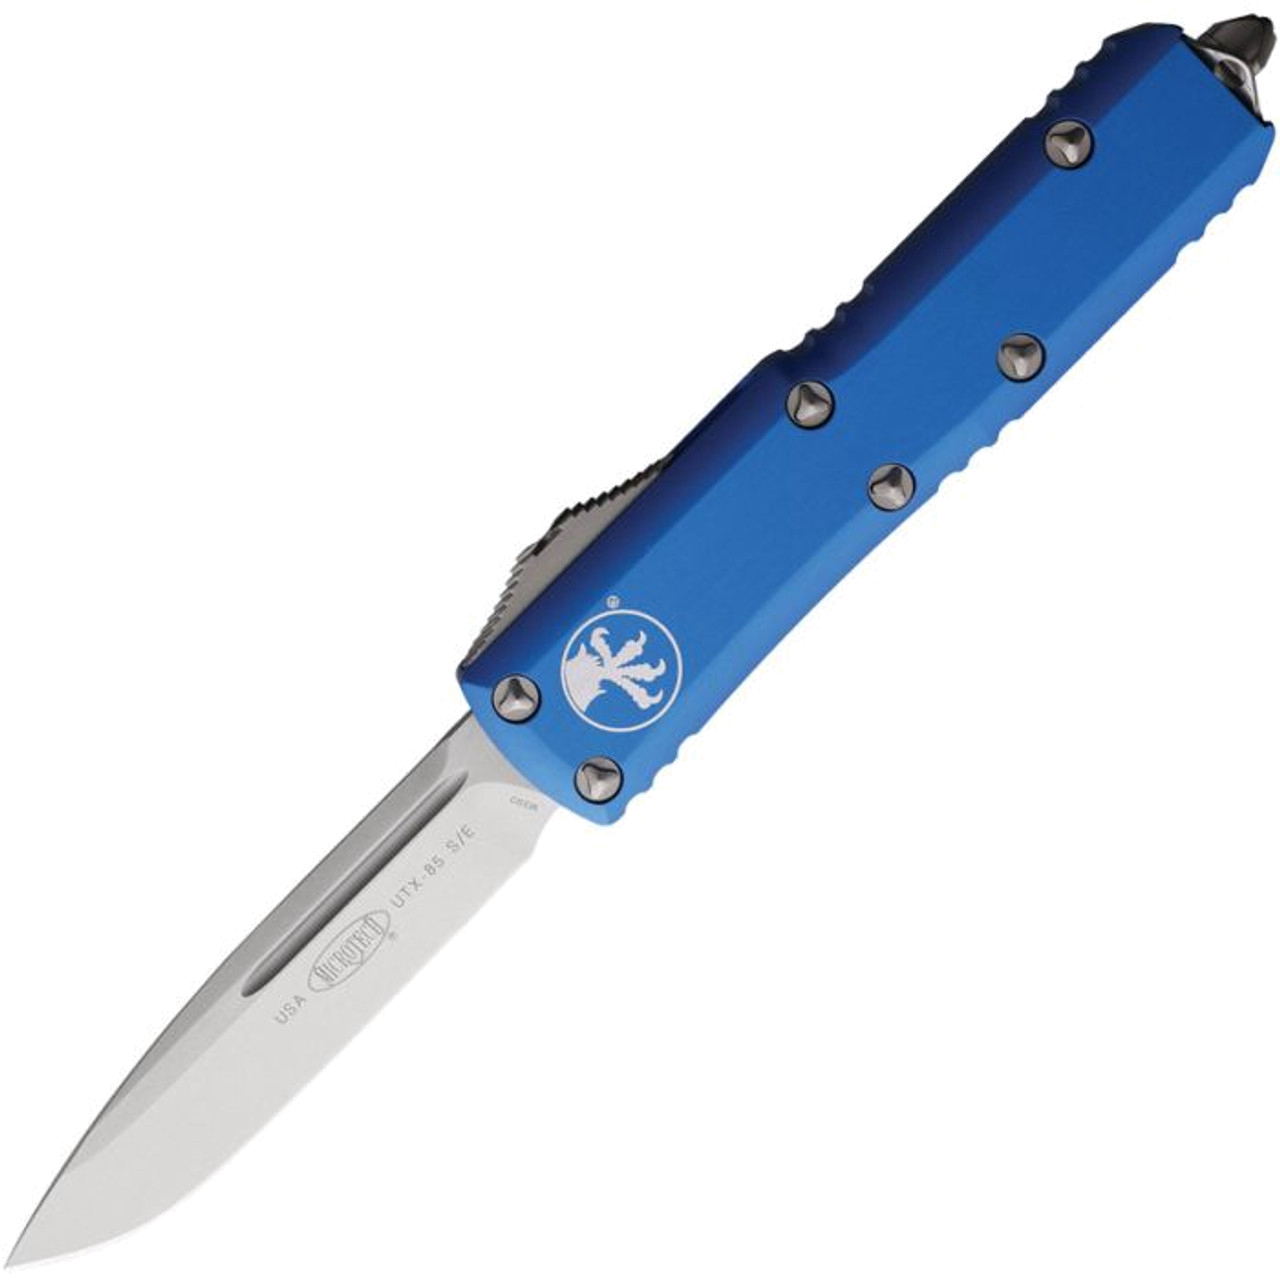 product image for Microtech UTX-85 SE Blue Aluminum MCT23110BL 3.13" Premium Steel